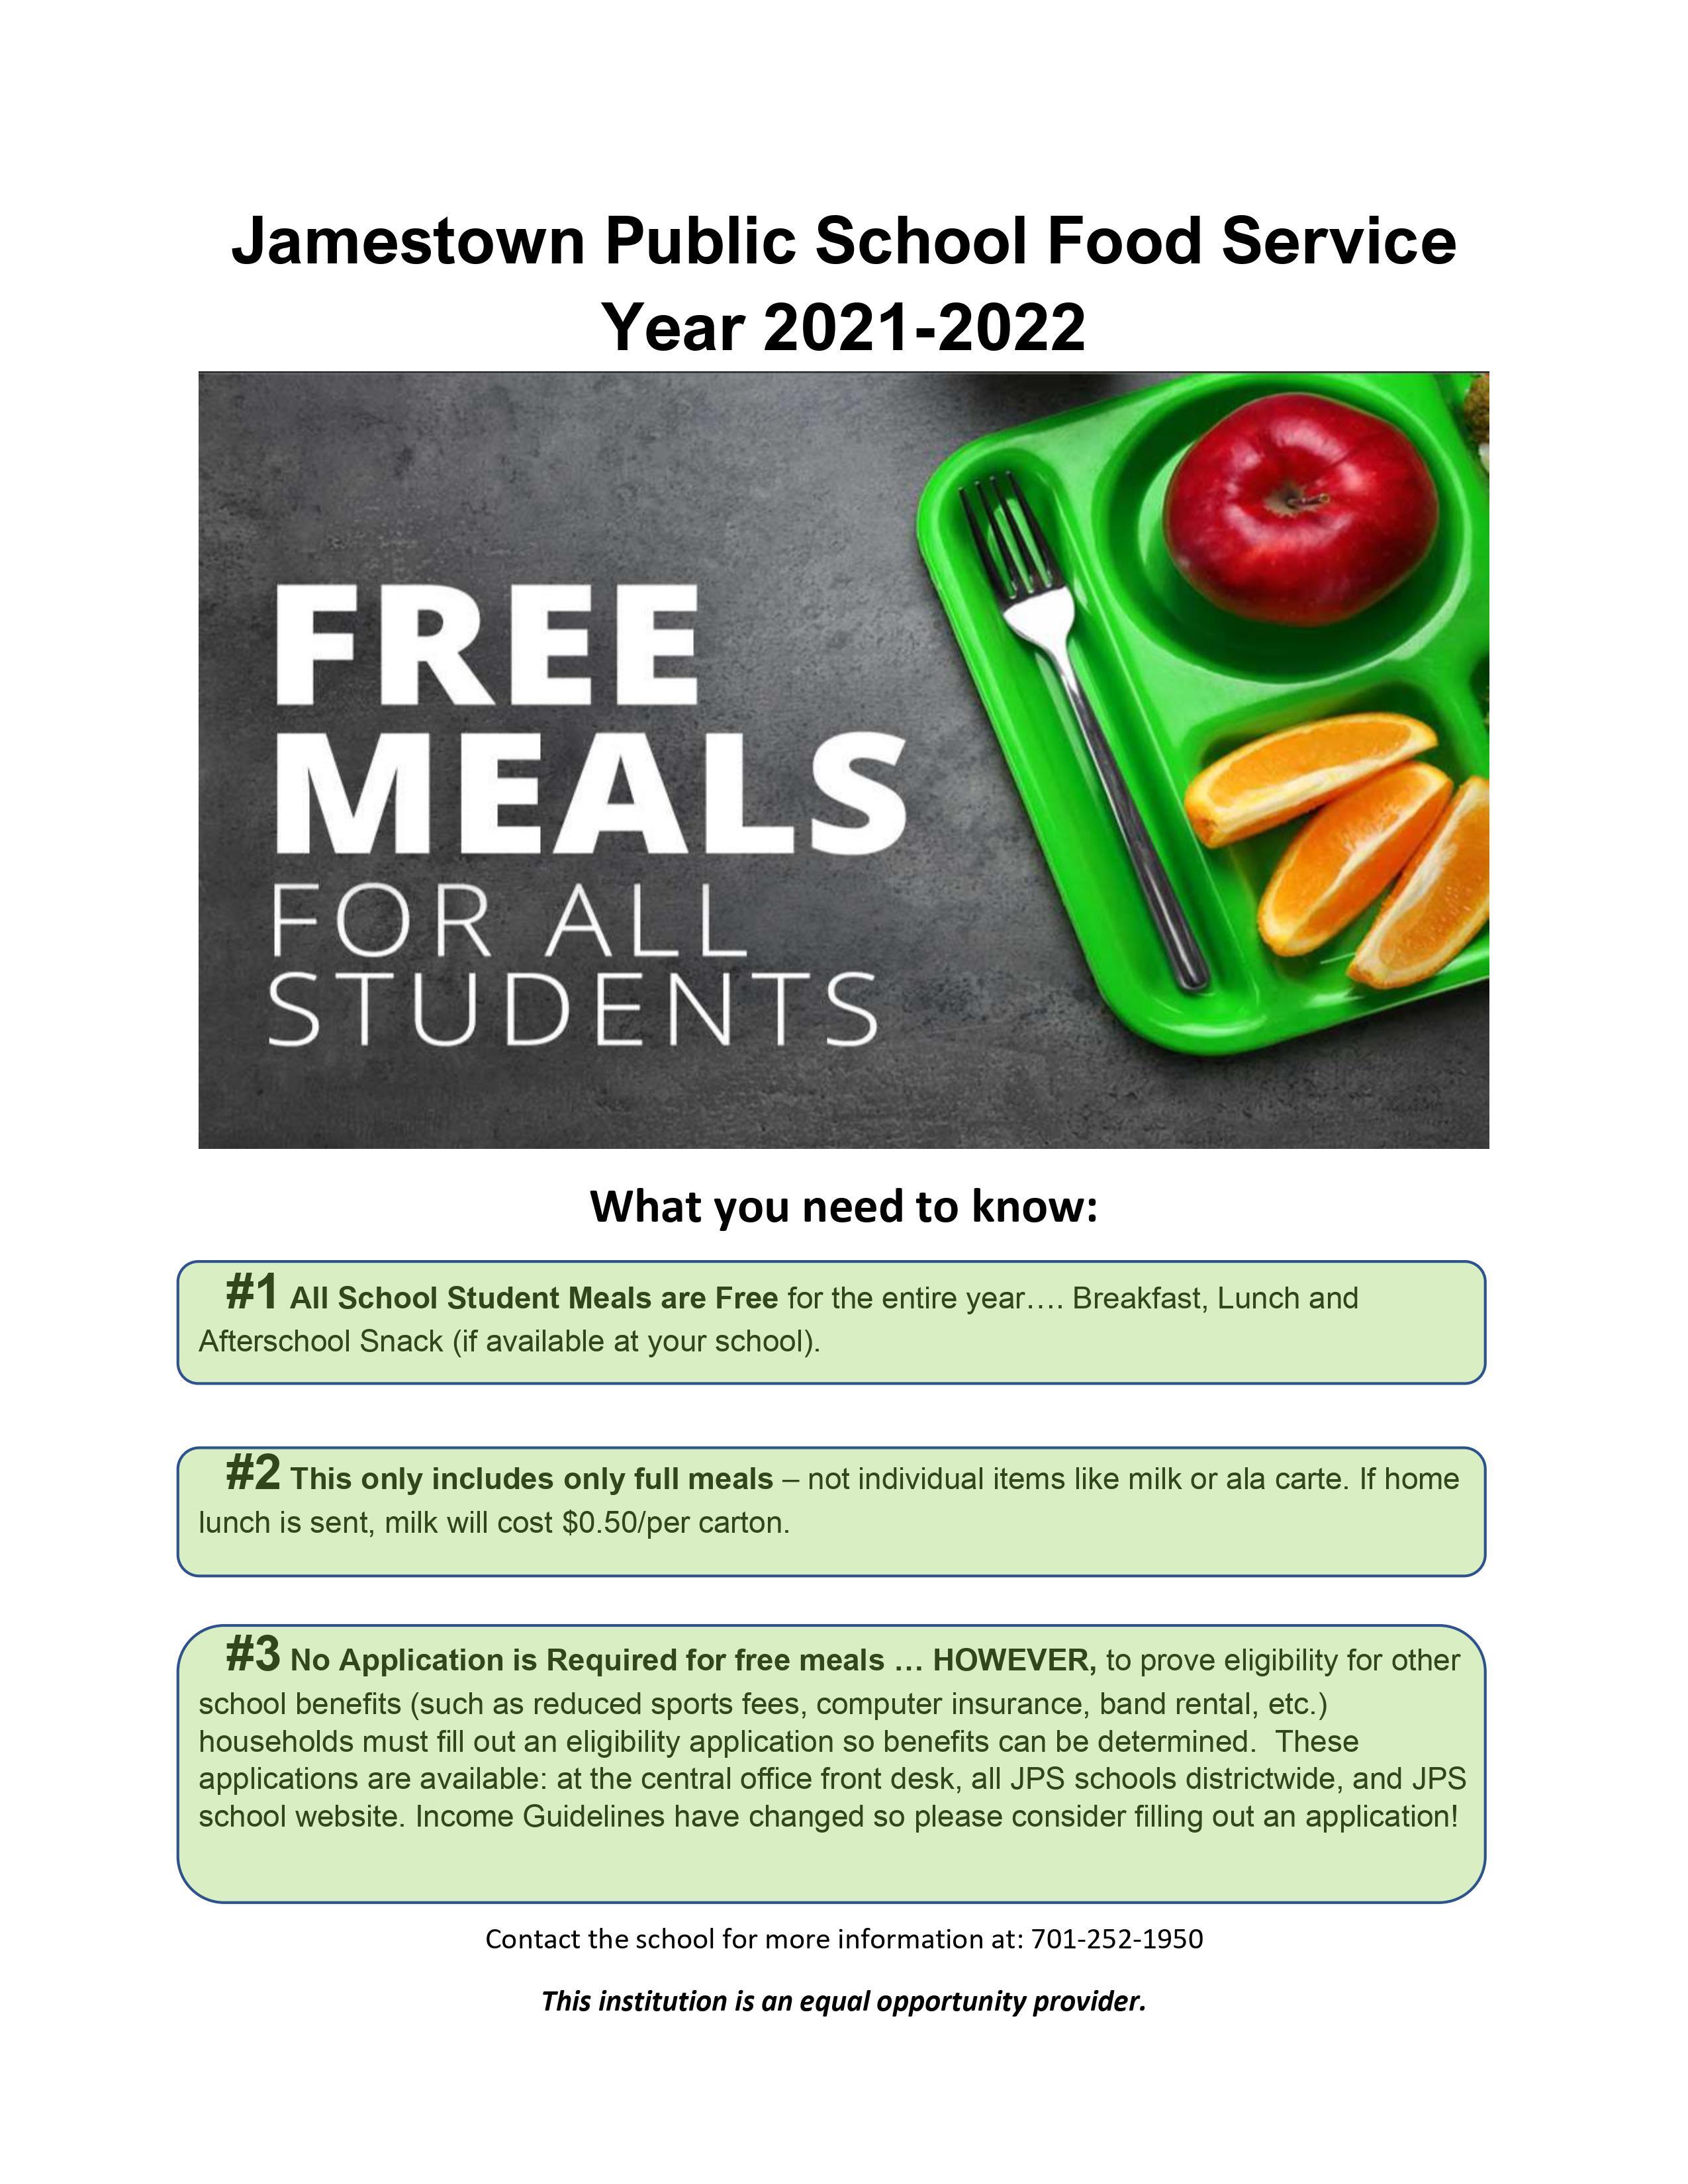 Says "Jamestown Public Schools supports ND agriculture by purchasing regionally produced foods and incorporating them into local school menus." Shows fork with potato, vegetables, milk, and apple.